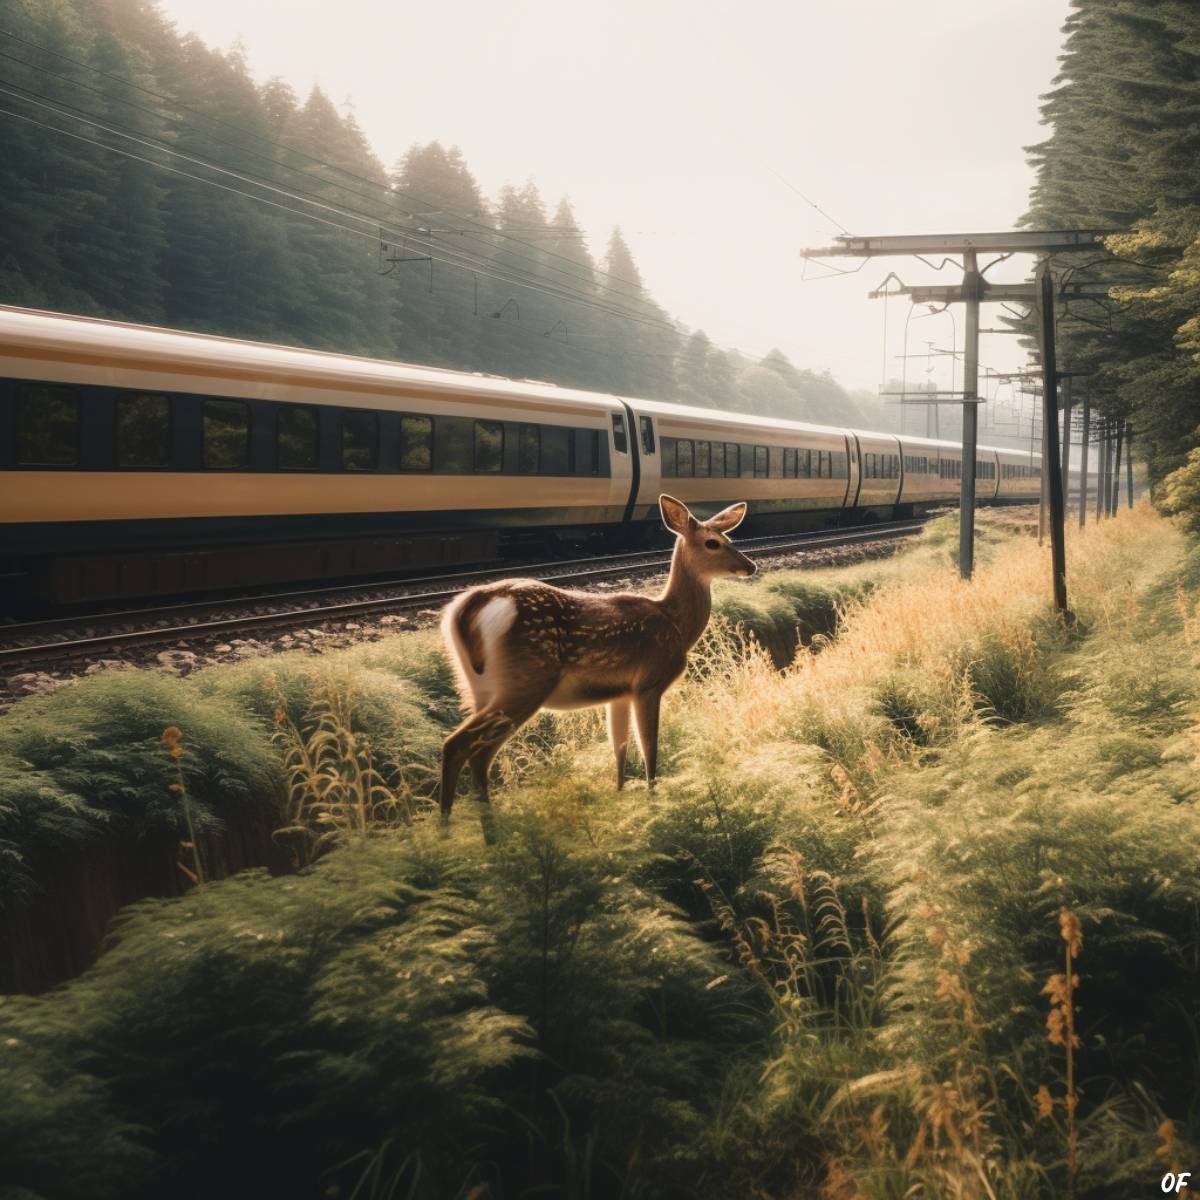 A Sika deer stands at the side of a railway track as a high speed Japanese train passes by.